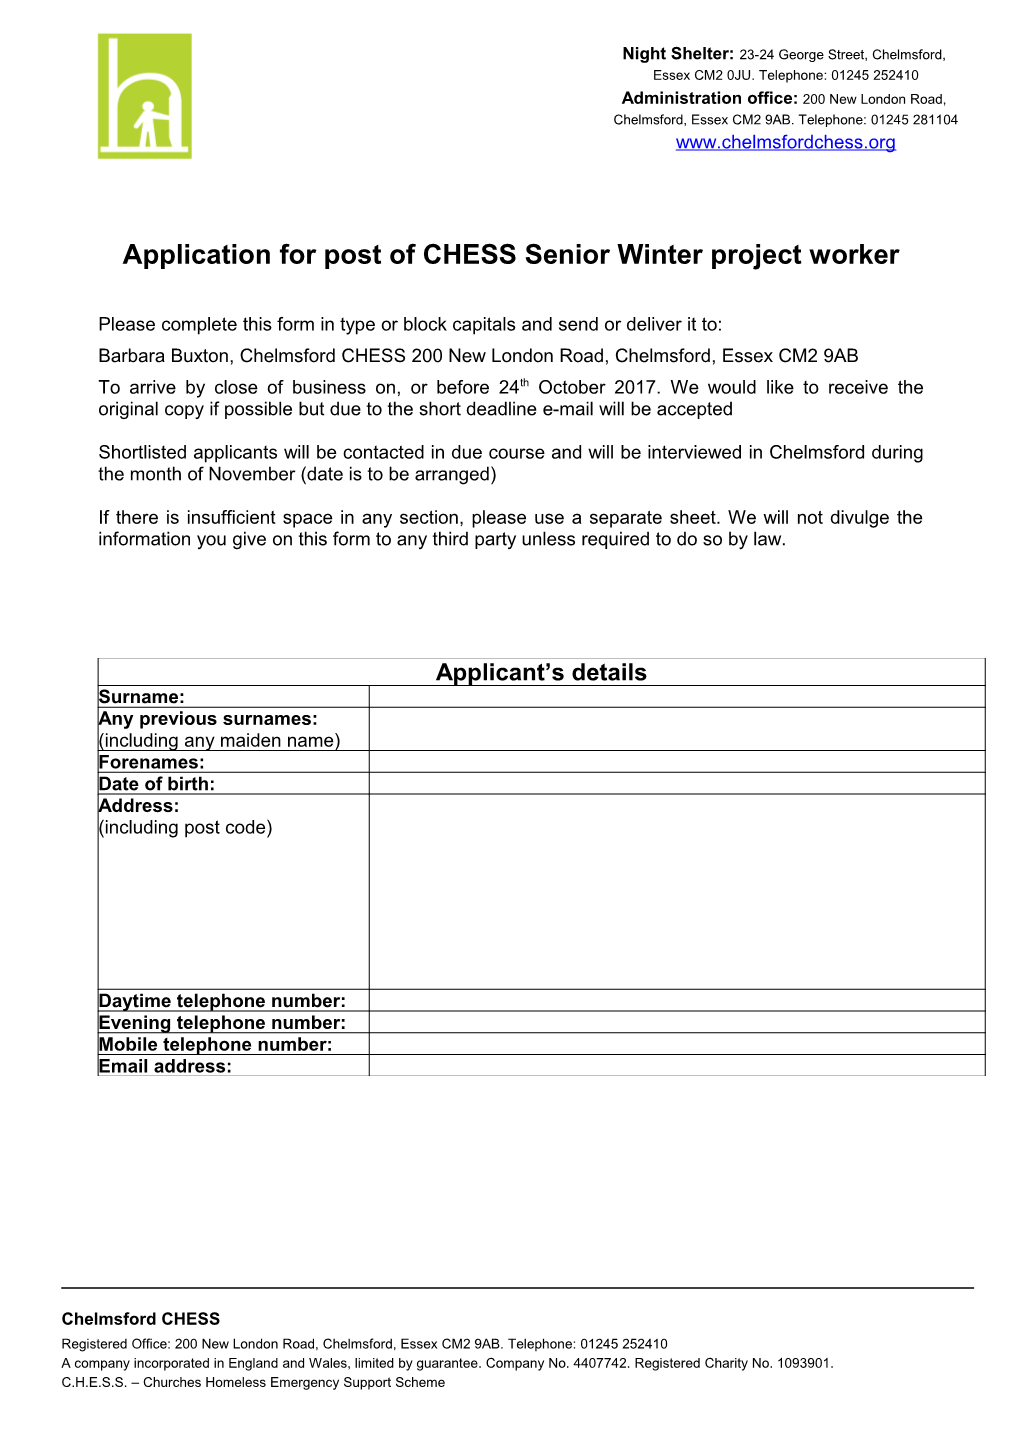 Application for Post of CHESS Senior Winter Project Worker